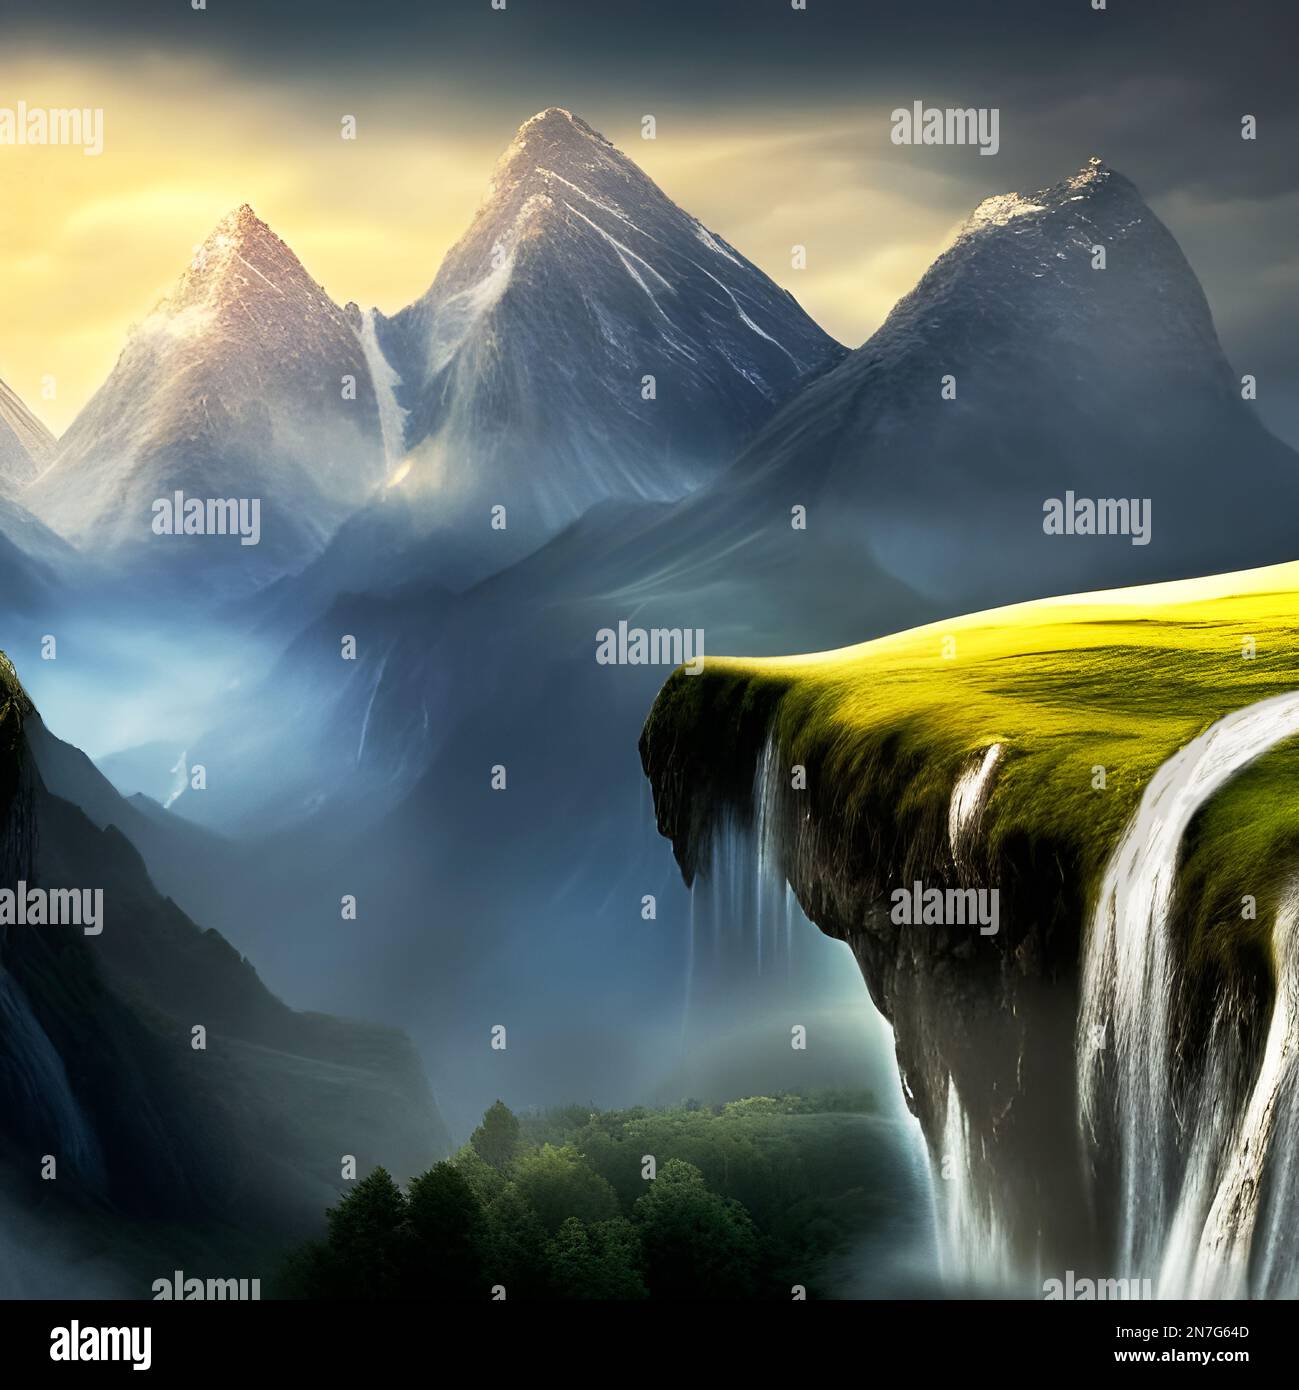 Small waterfall and mountain landscape depiction. Stock Photo